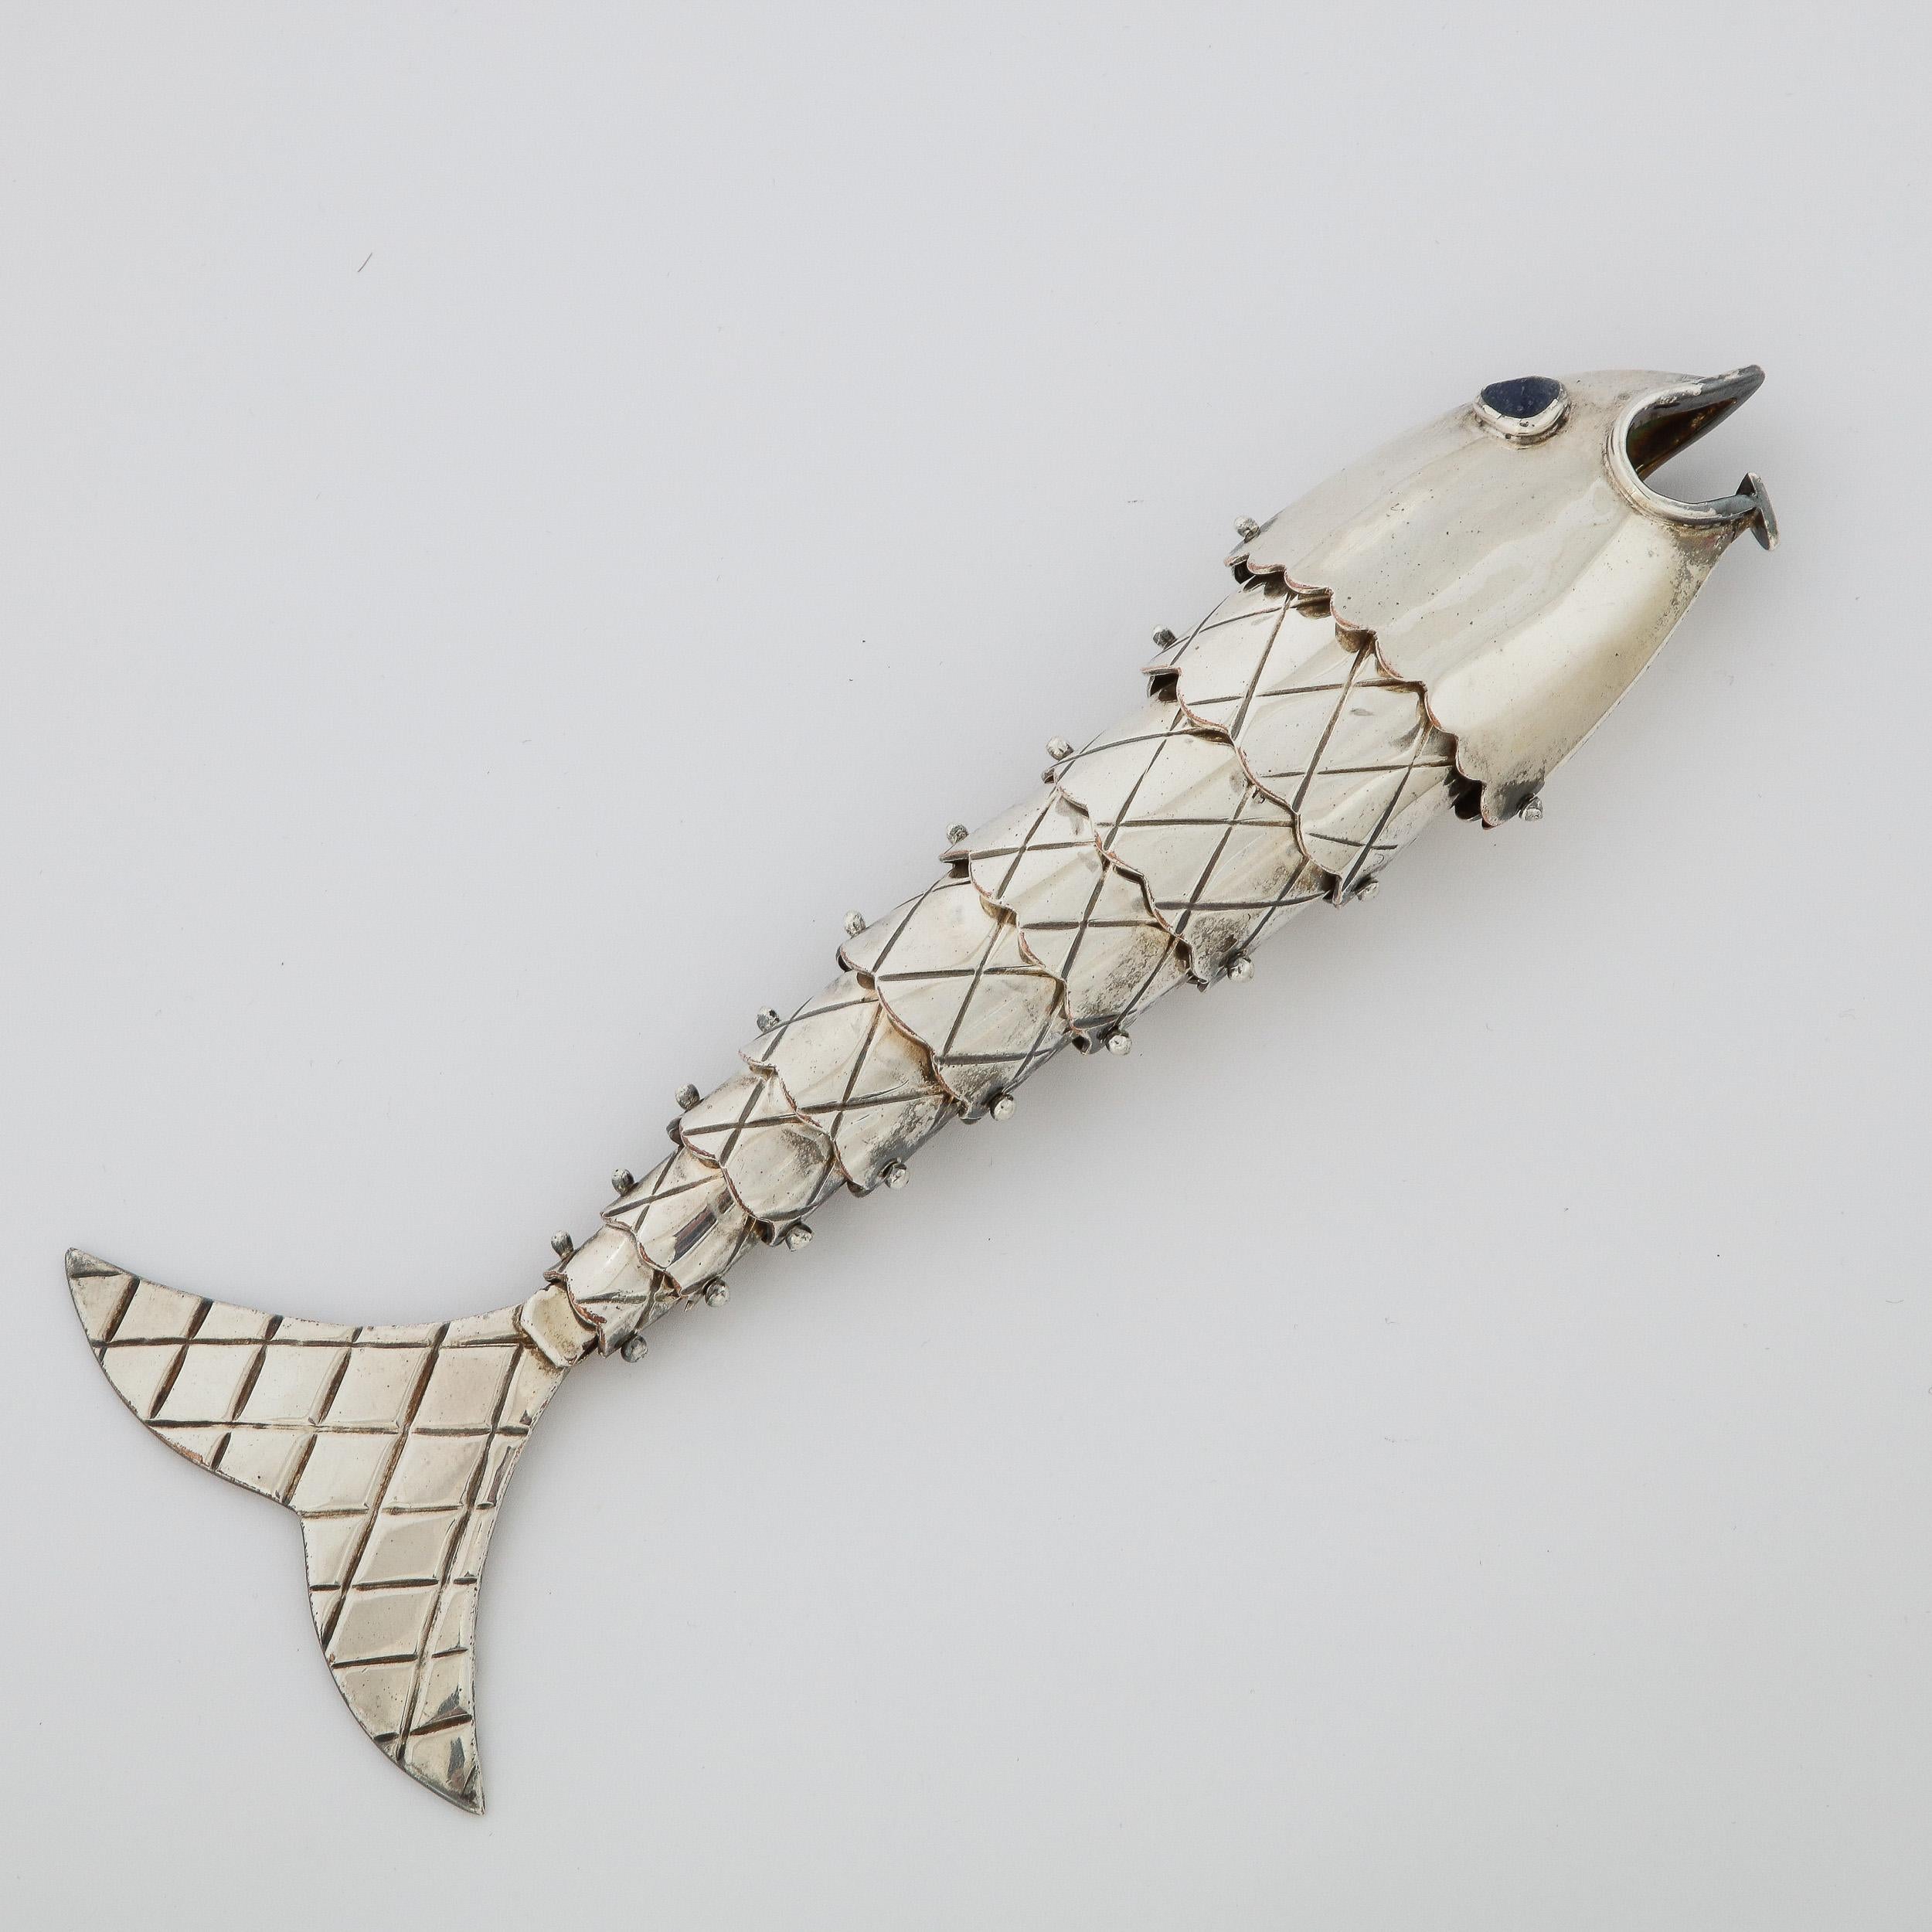 Mexican Modernist Hand Crafted Silver Plate Fish Bottle Opener by Emilia Castillo